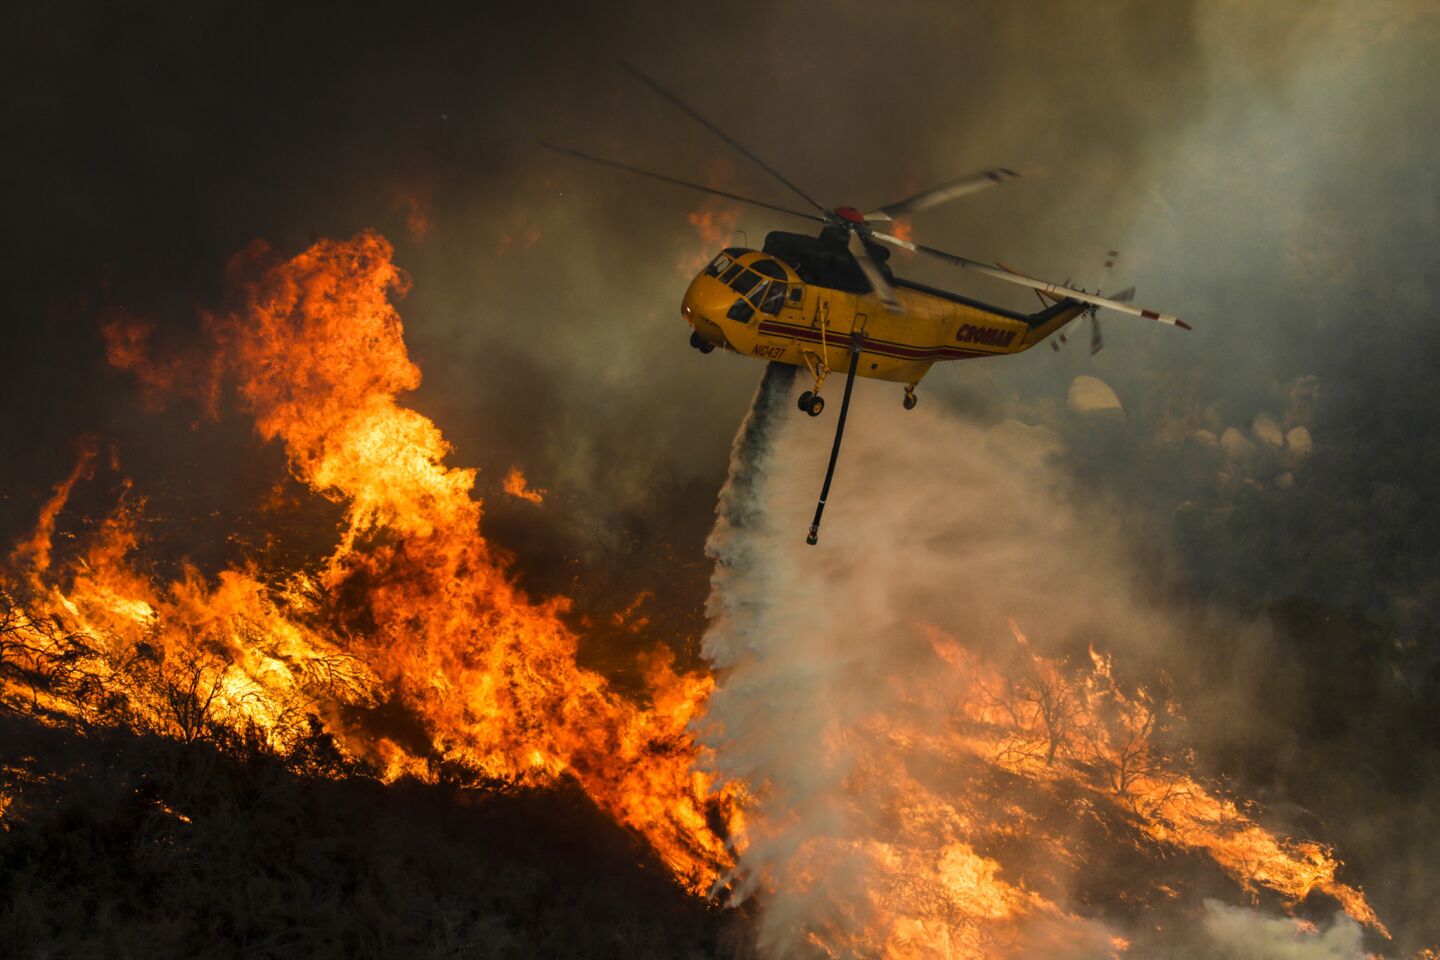 A helicopter fighting the Holy fire drops water on flames at North Main Divide along Ortega Highway.